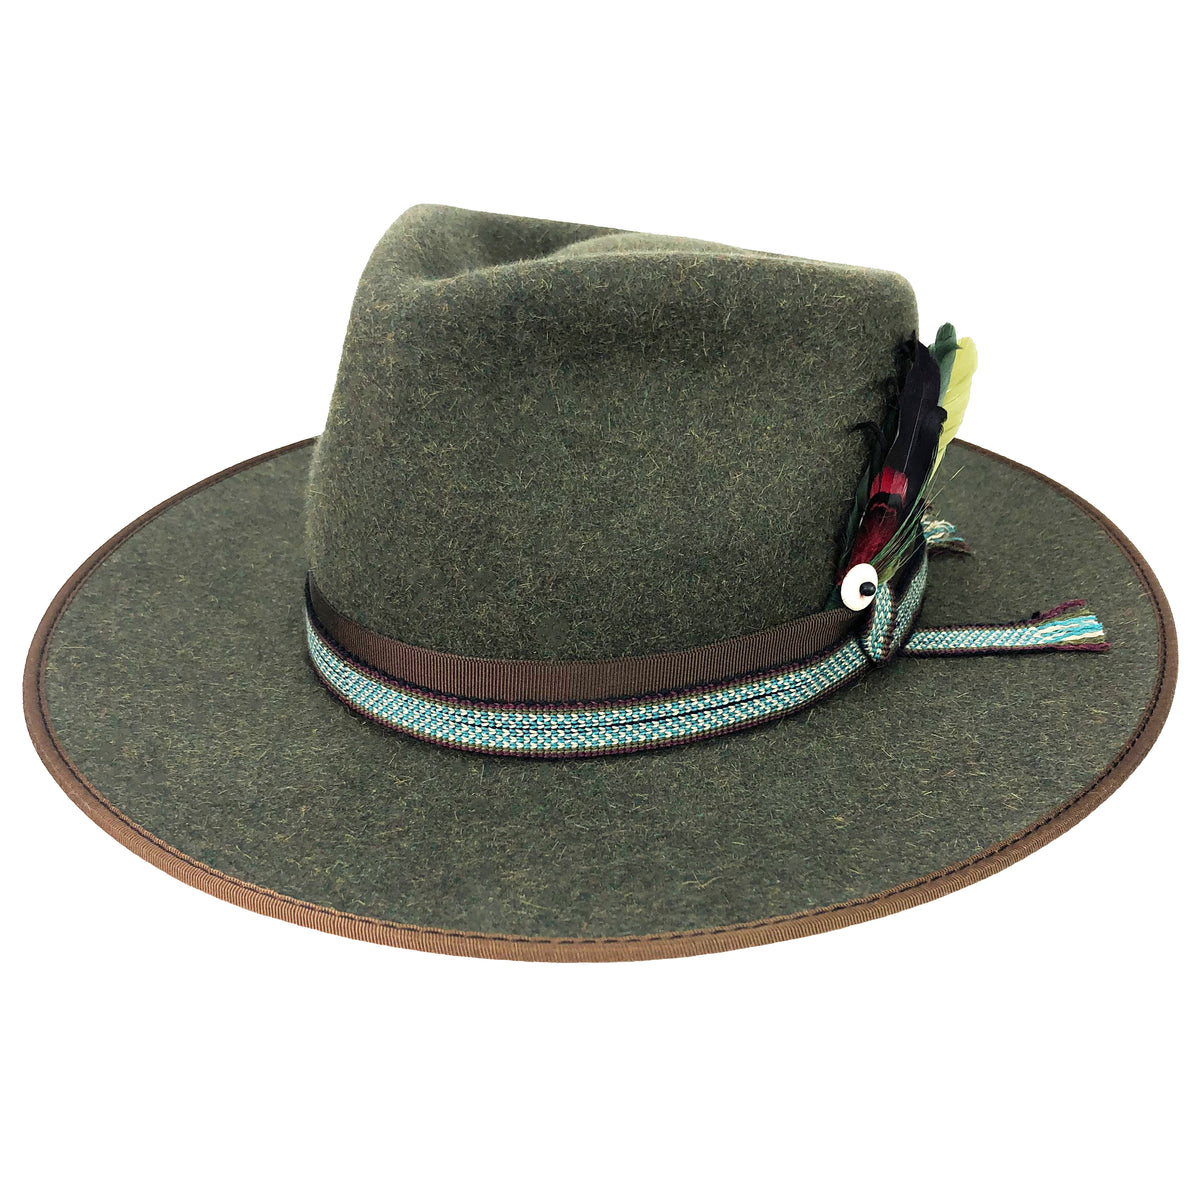 hatWRKS original, made with dress weight fur felt and has a teardrop fedora crown with a bound brim